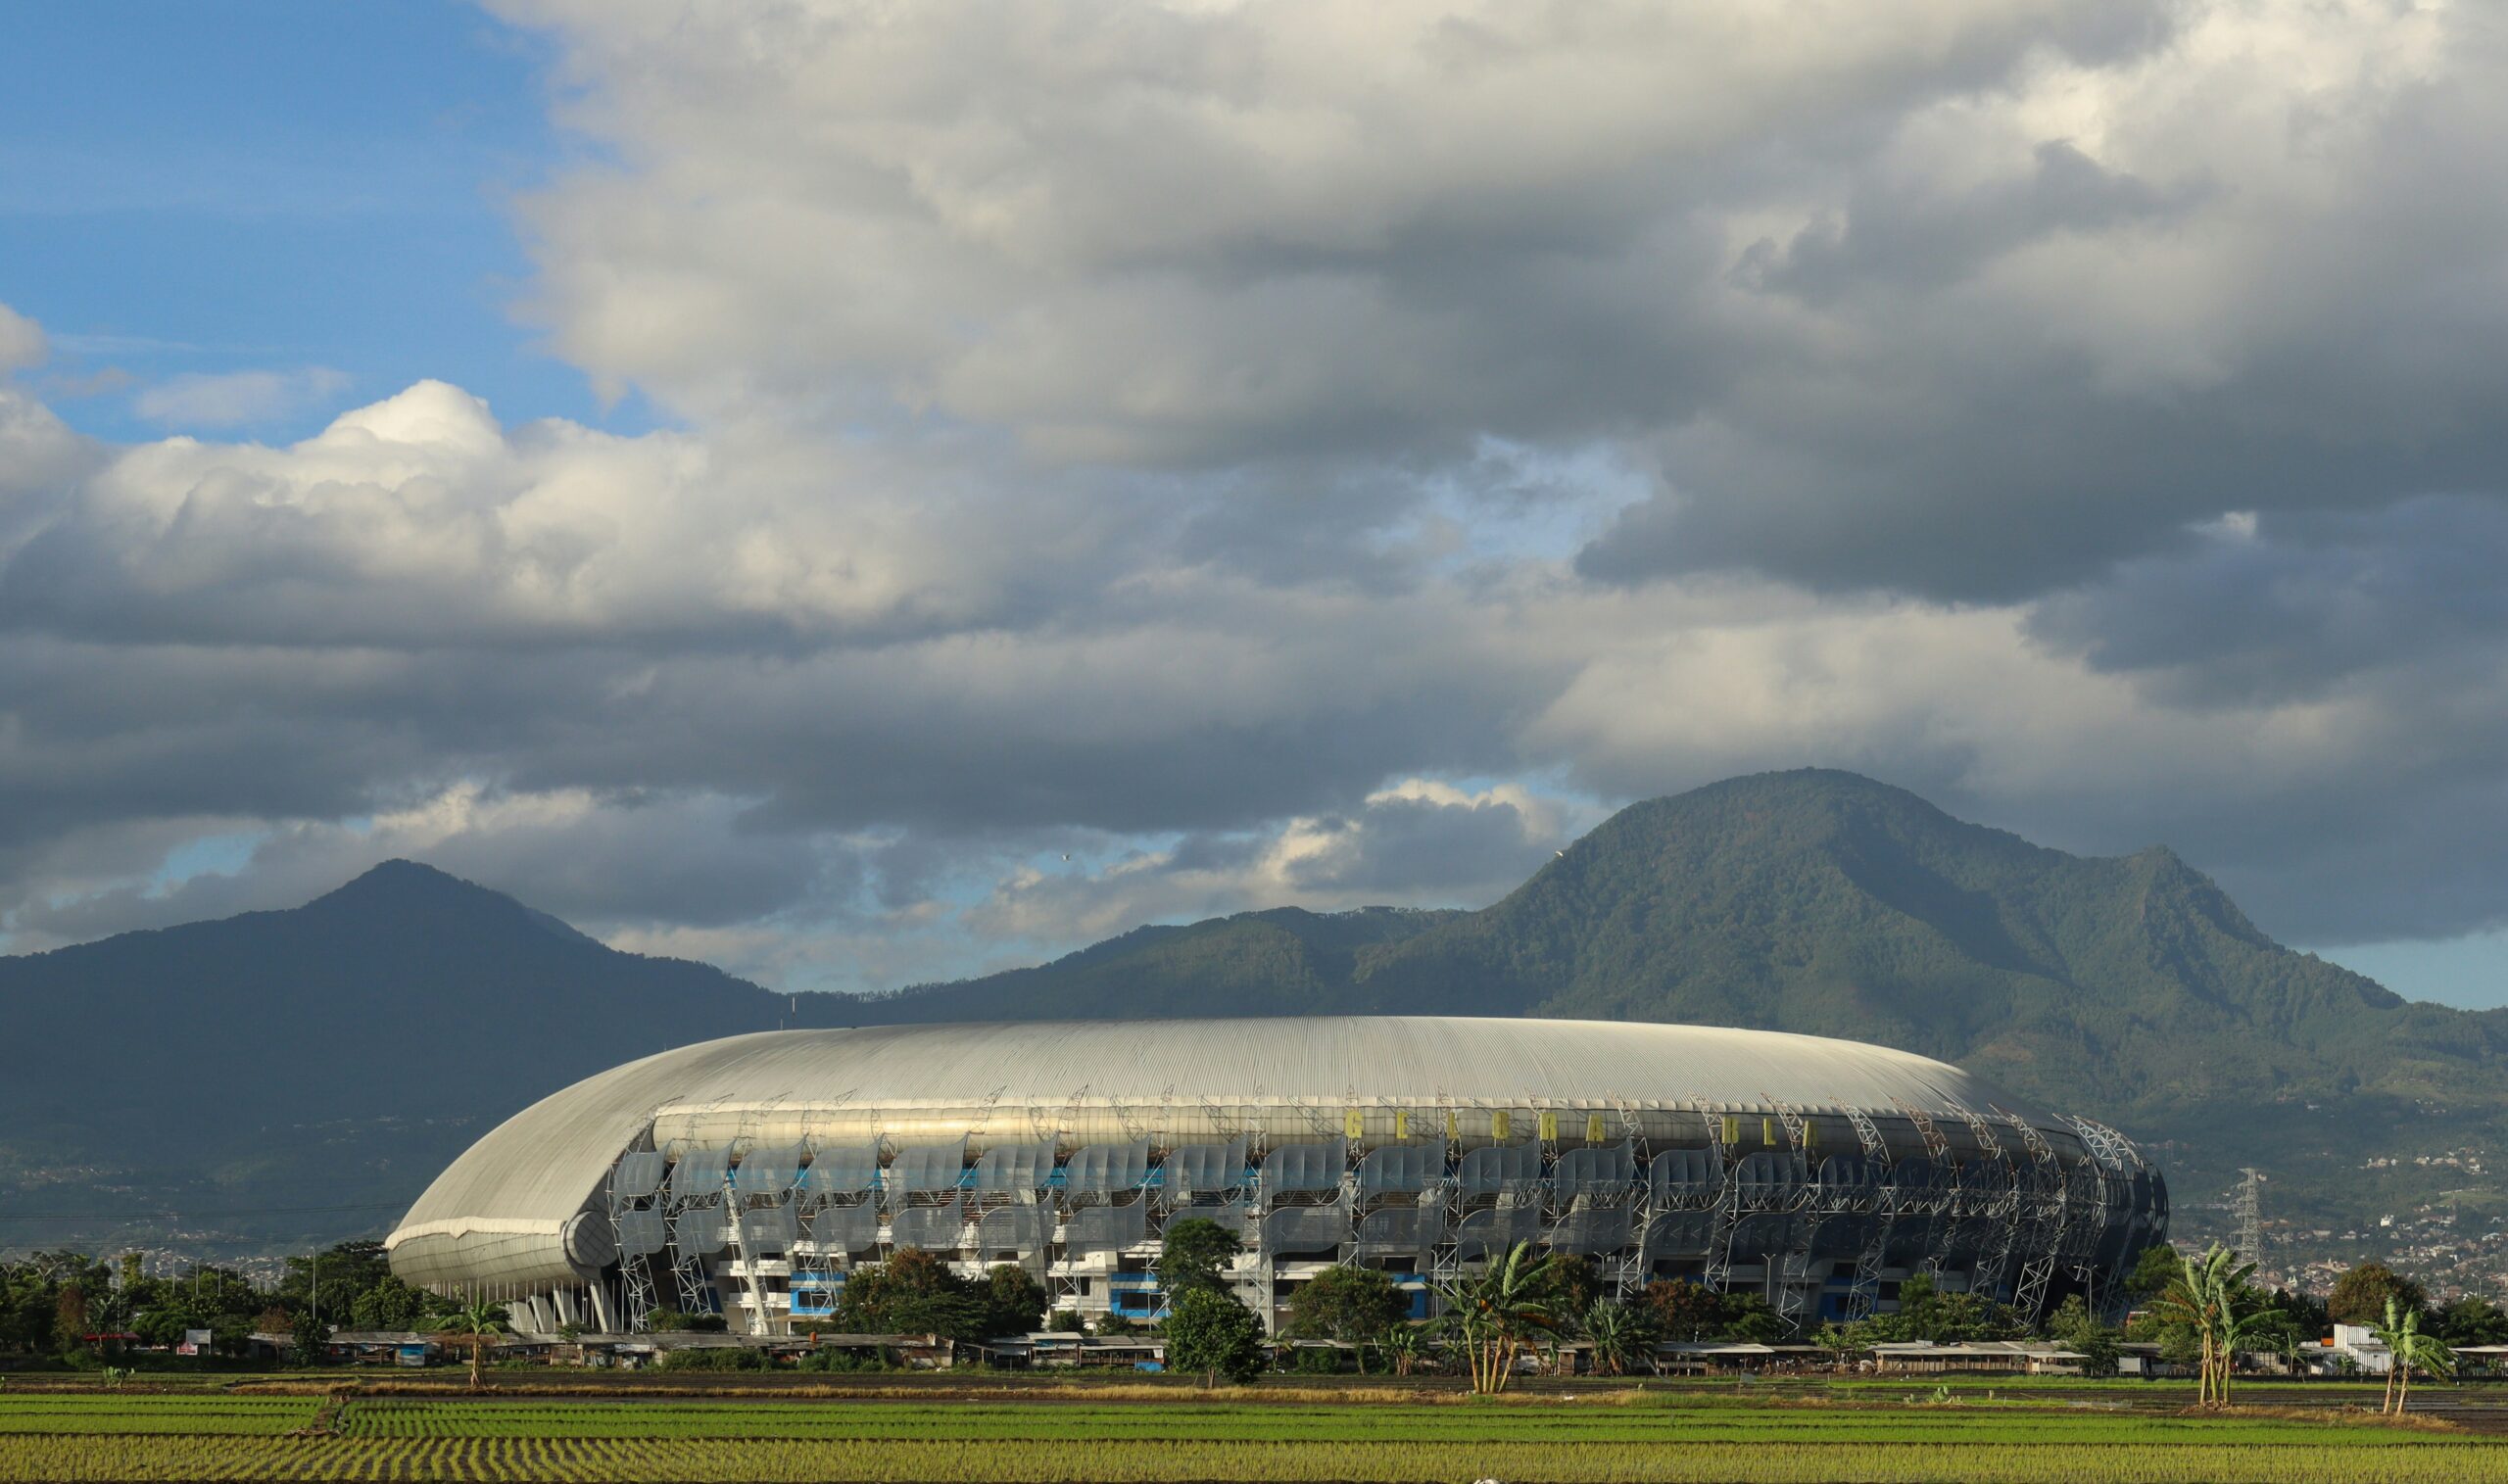 a large stadium with mountains in the background